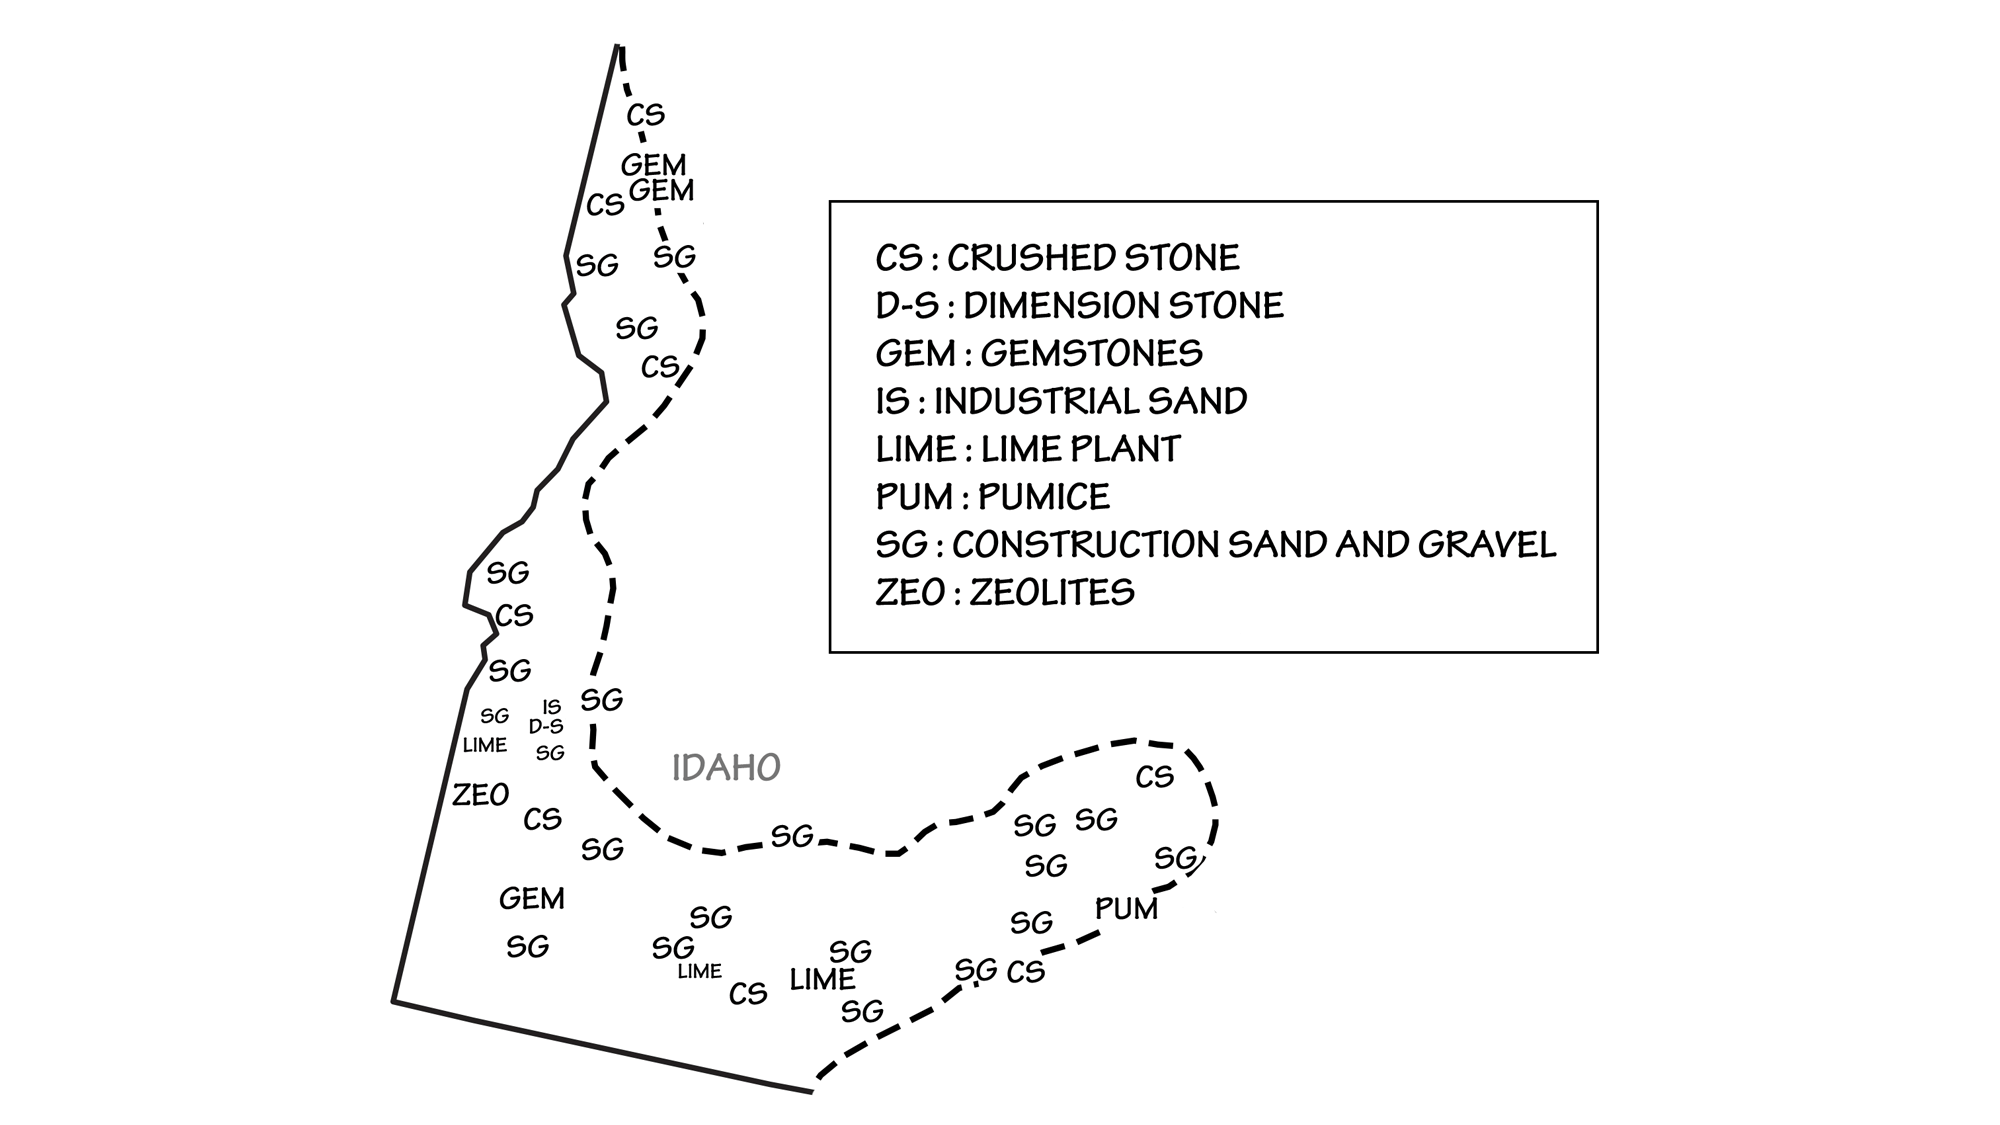 Simple map showing locations of mineral resources in the Columbia Plateau region of Idaho.